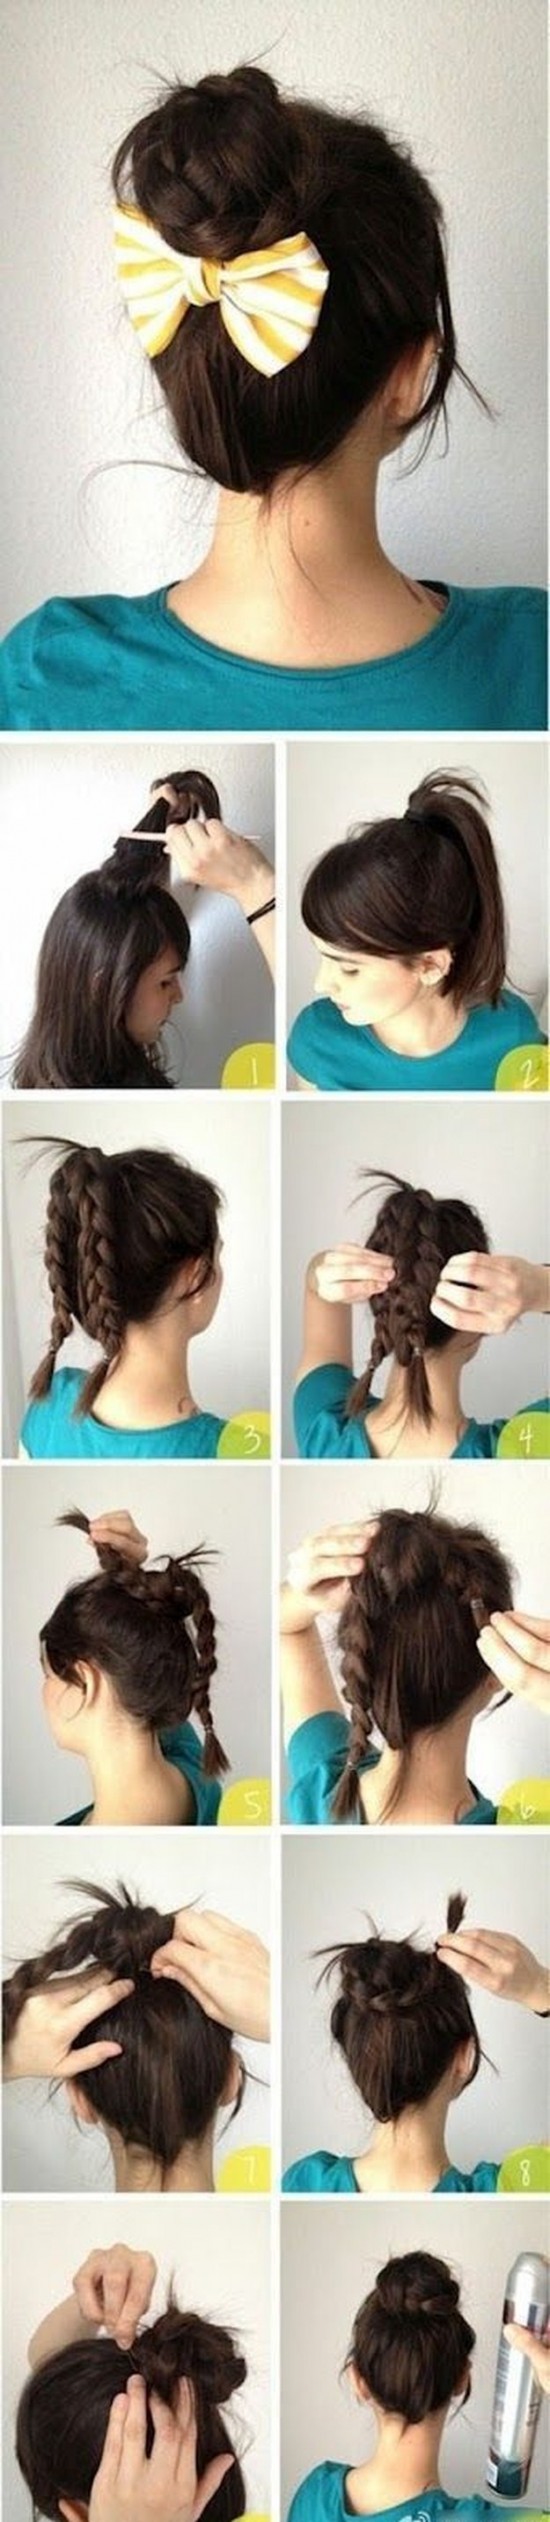 Creative-Hairstyles-That-You-Can-Easily-Do-at-Home-027